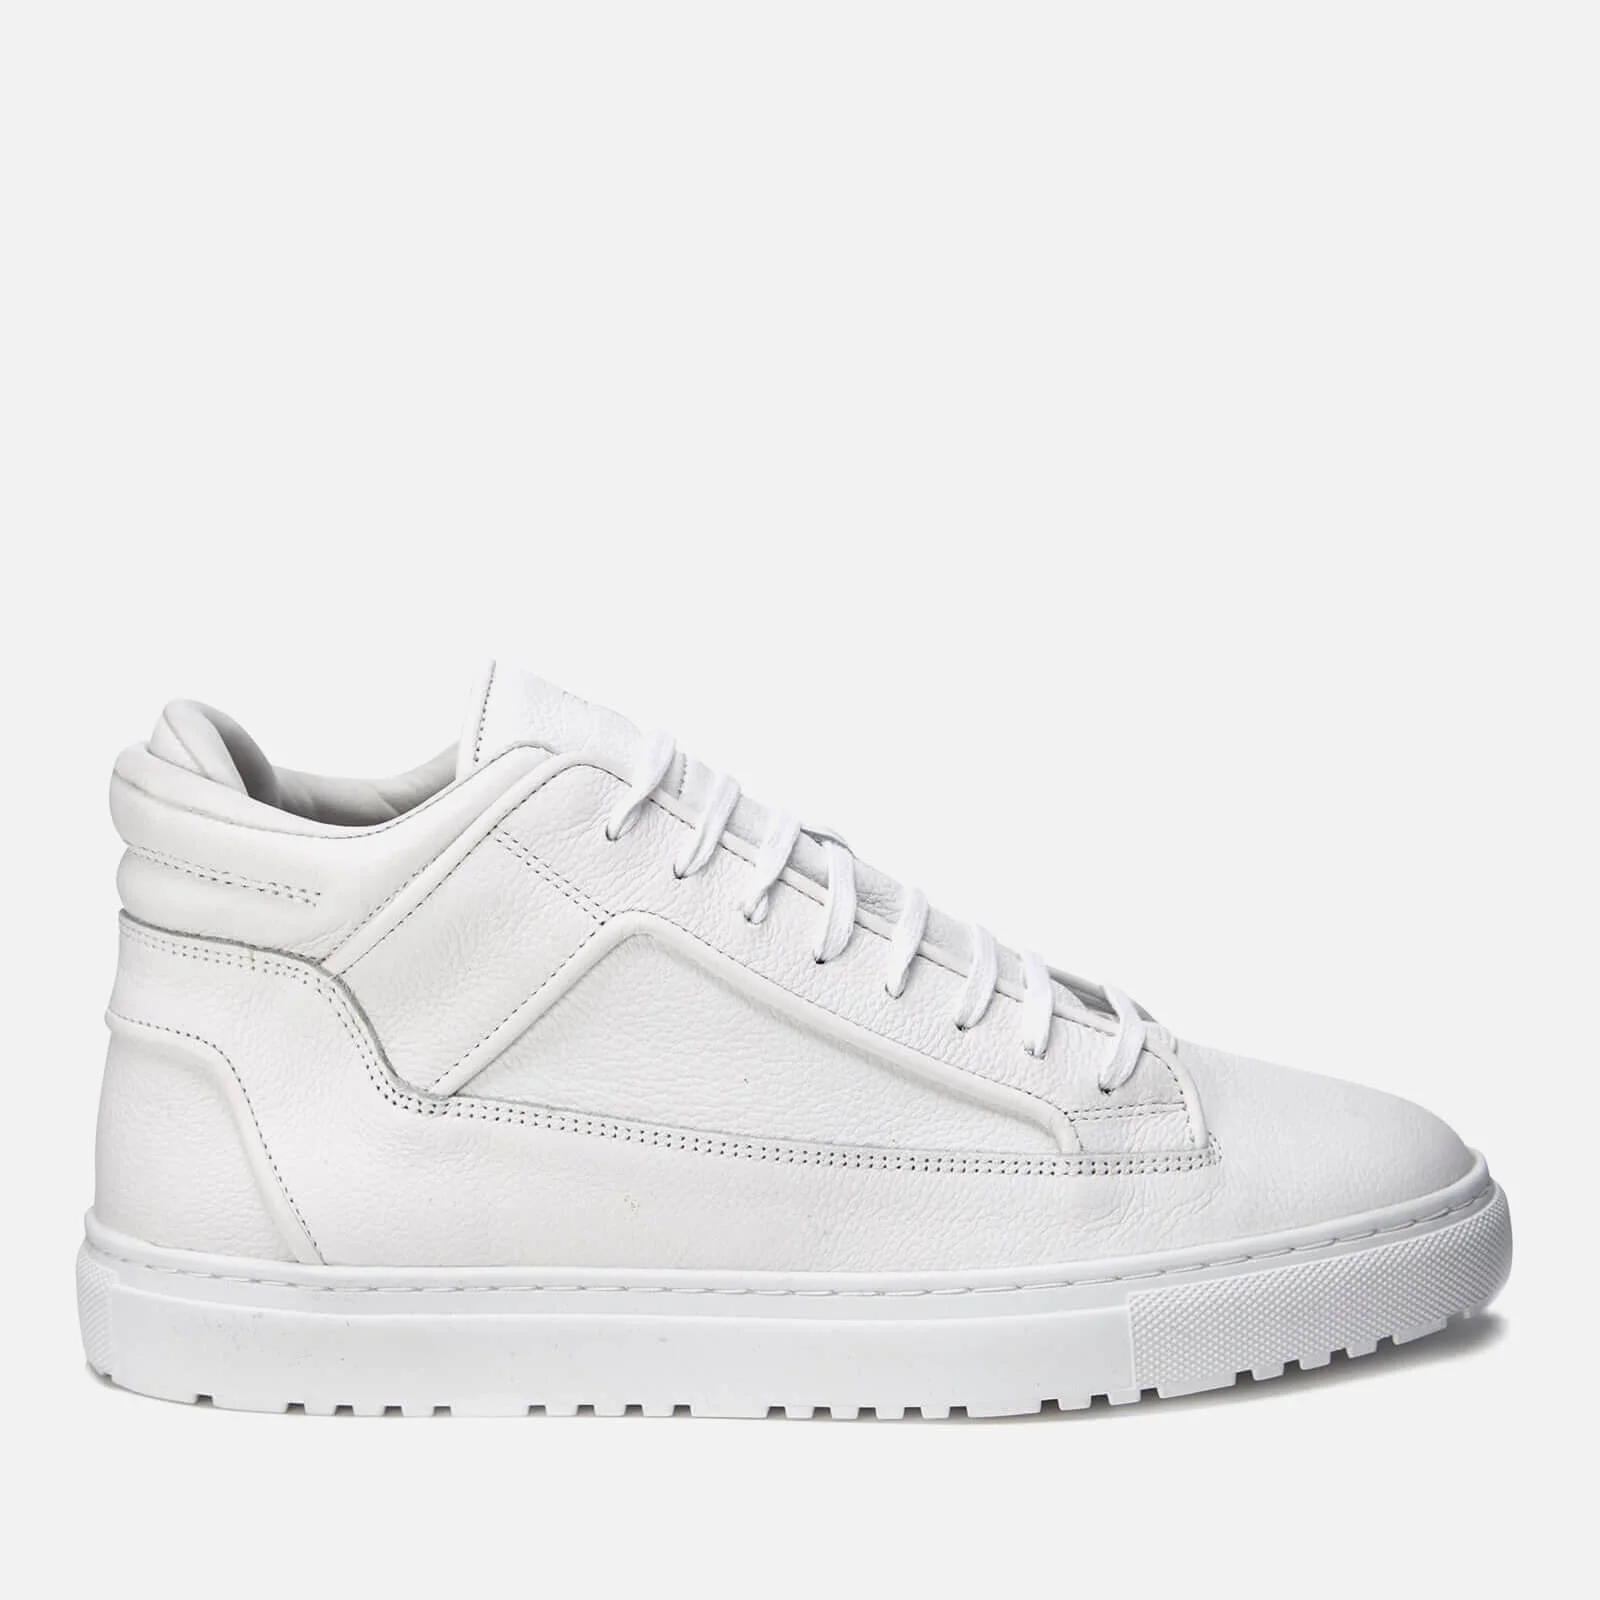 ETQ. Men's Mid Top 2 Leather Trainers - White Image 1